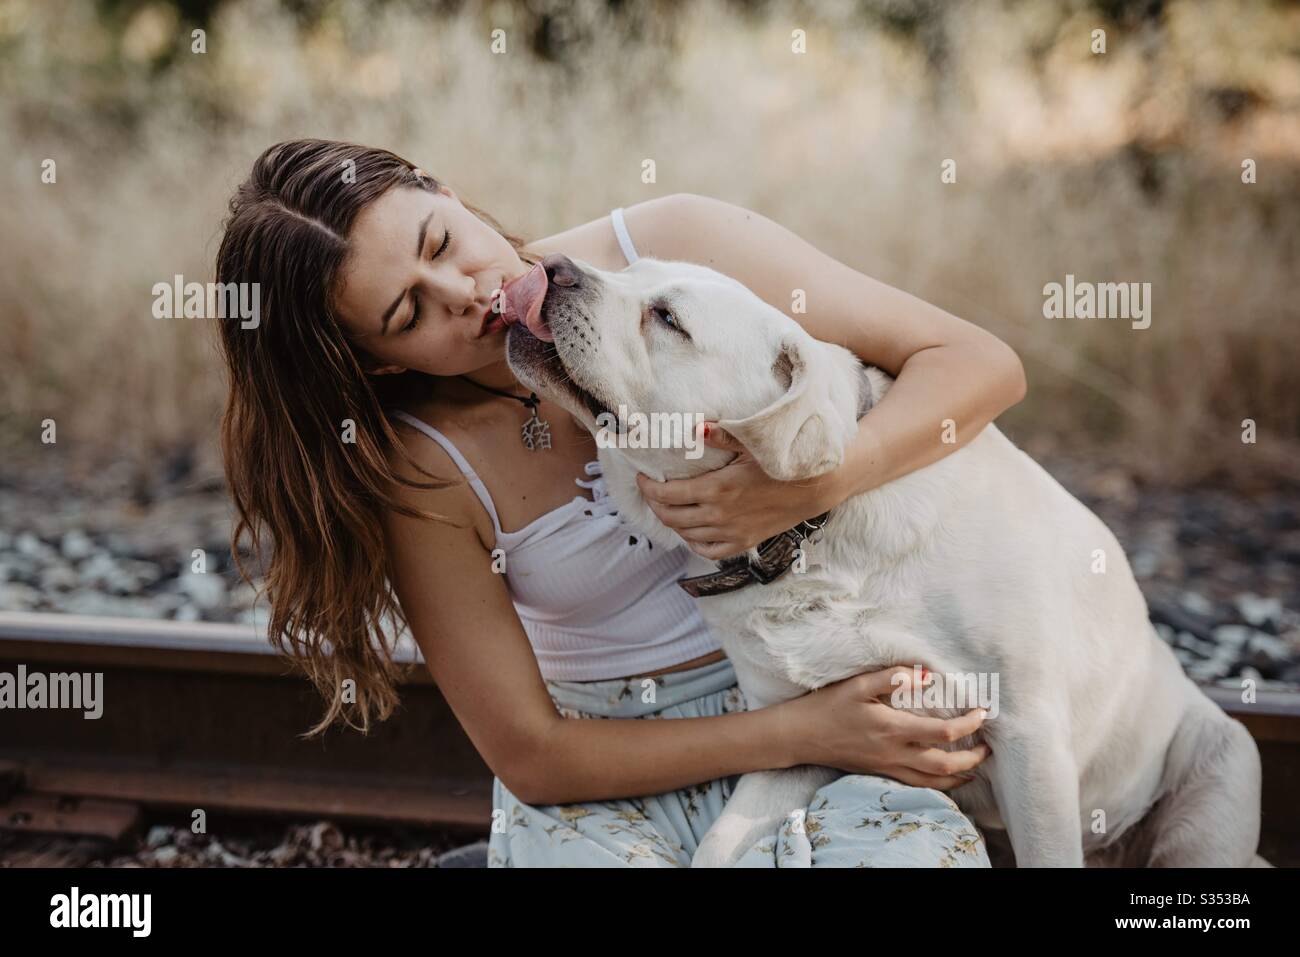 Girl getting kisses from white lab and wearing a white tank top sitting on train tracks. Stock Photo